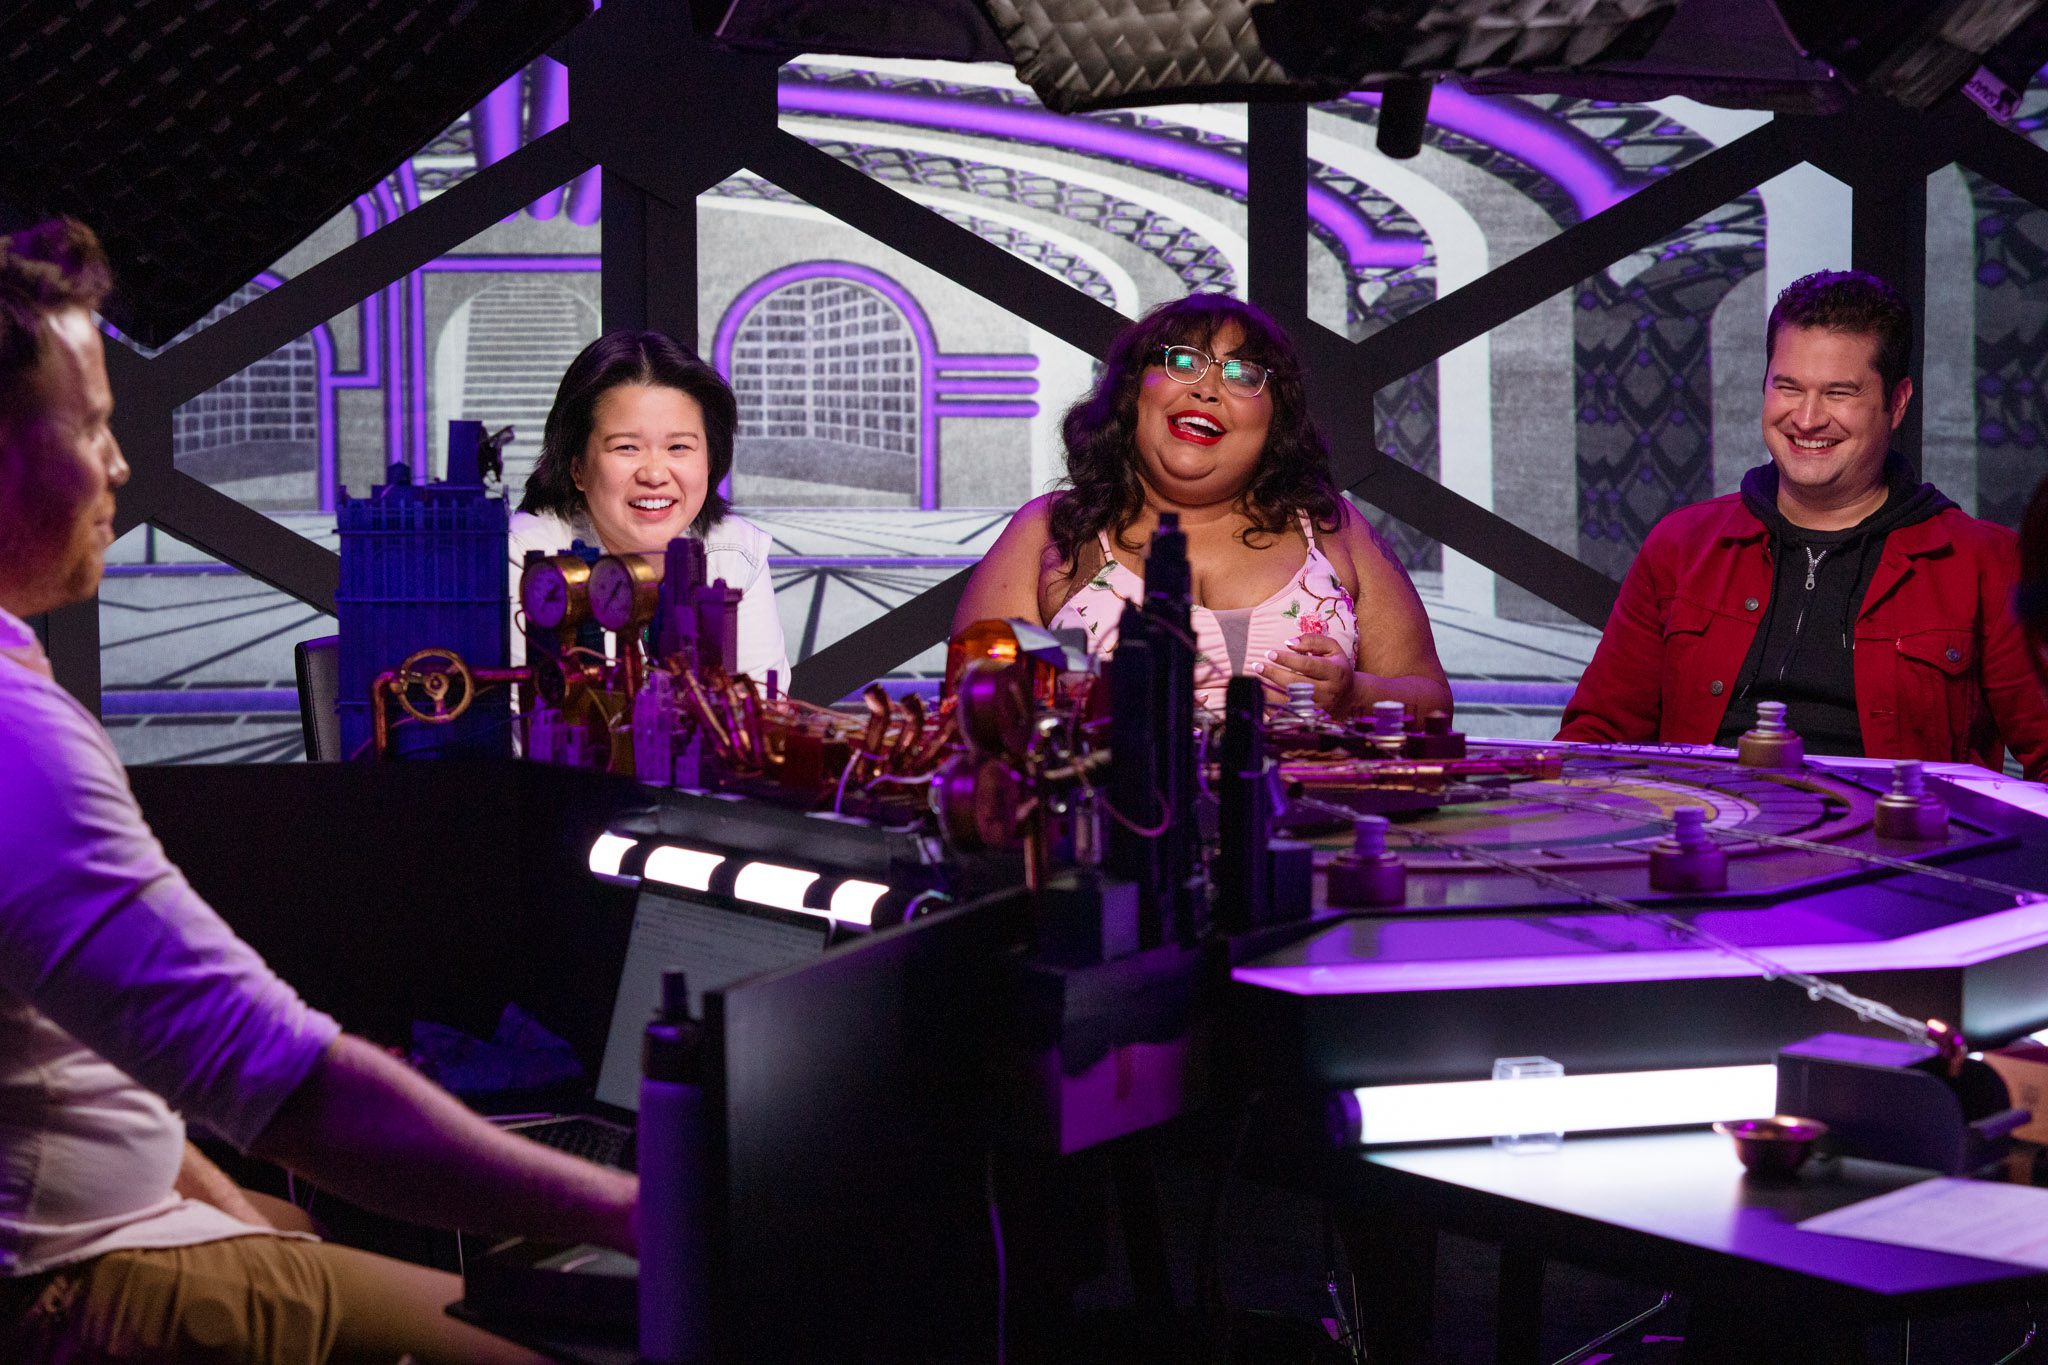 The cast of mentopolis at the table. From left to right: Alex Song-Xia, Danielle Radford, and Mike Trapp